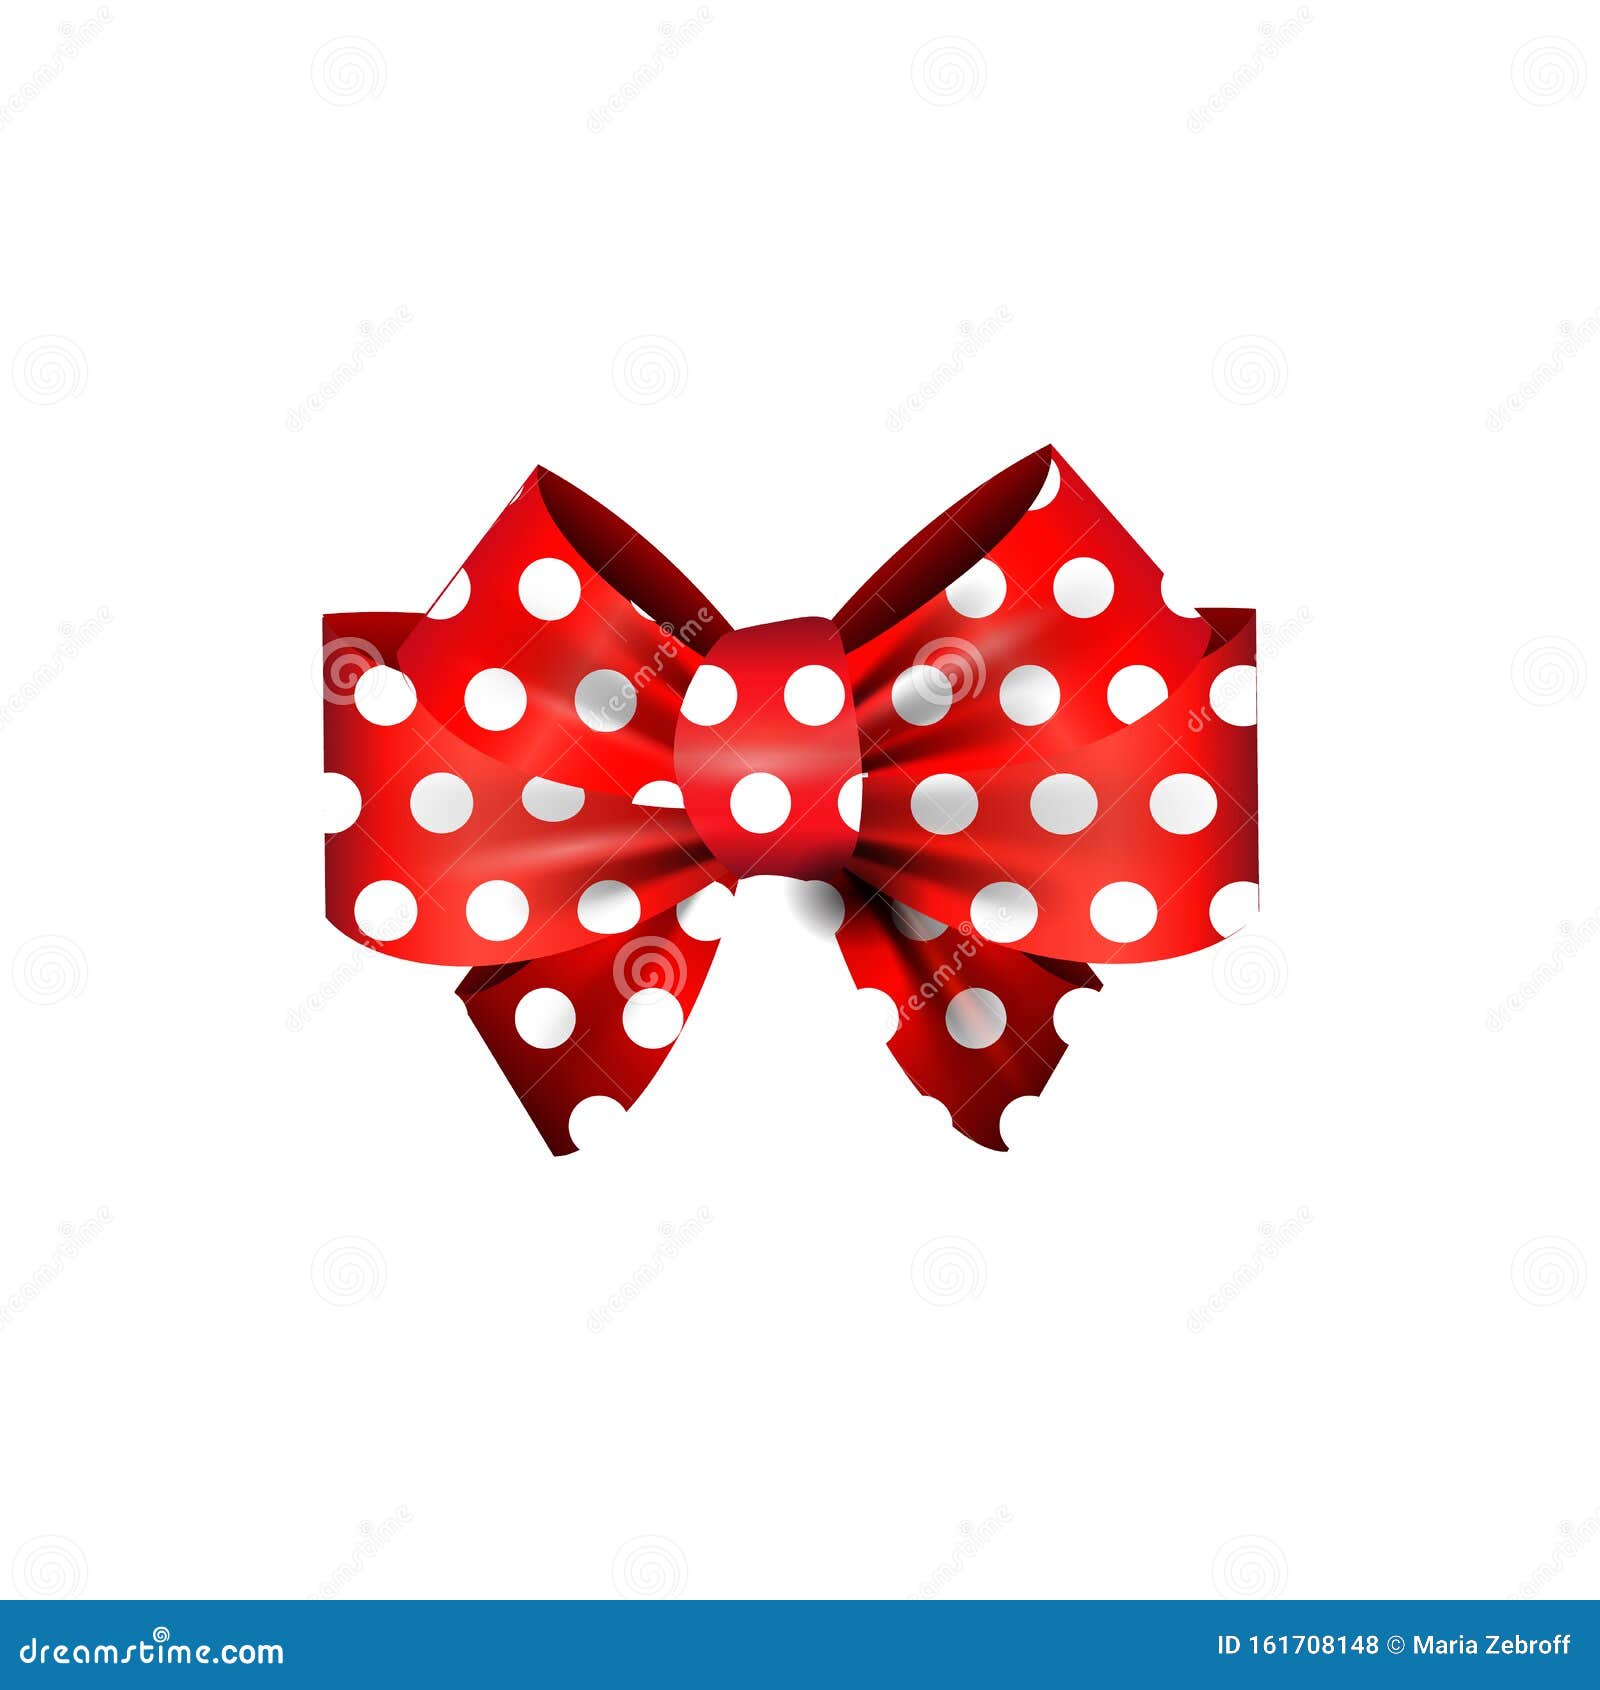 Heart Dog Bow Tie With Red Polka Dot Center